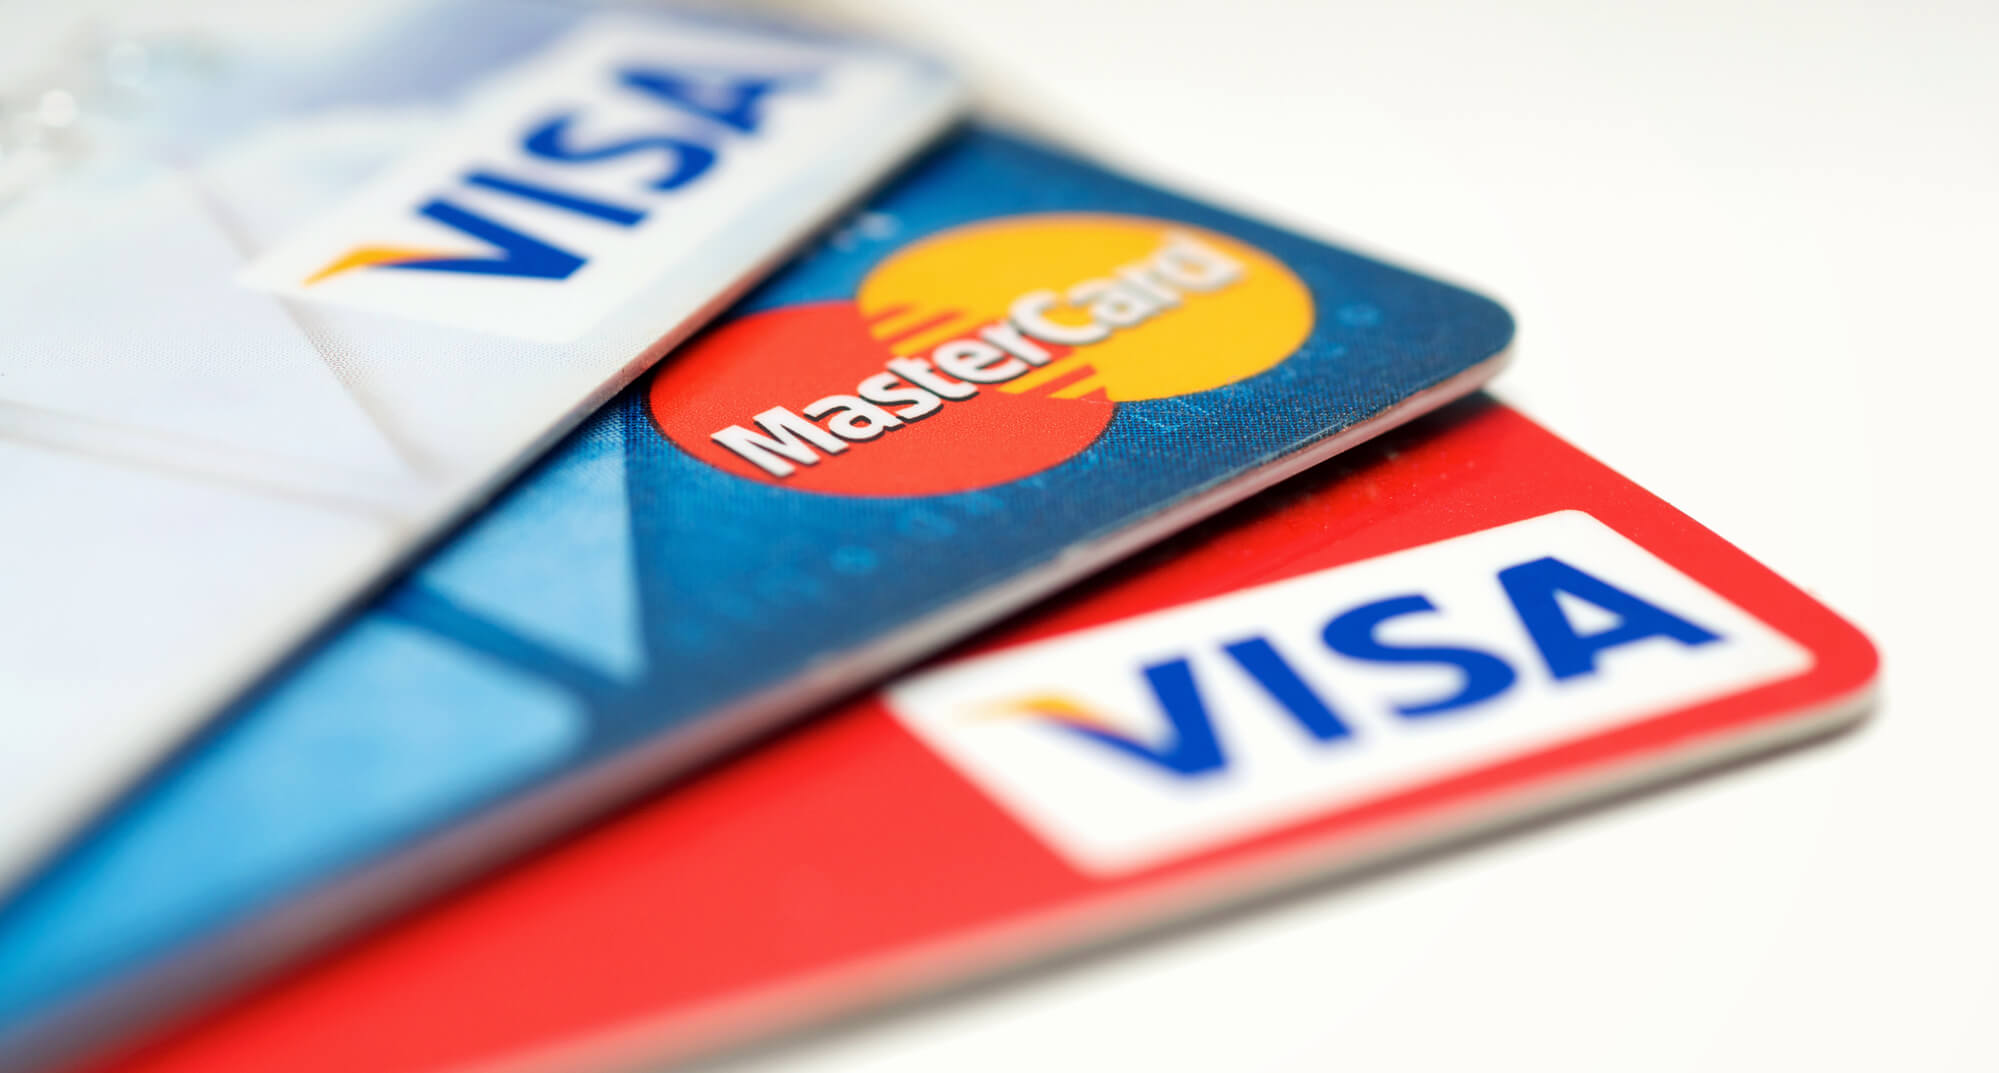 VISA, Mastercard and Union pay credit cards